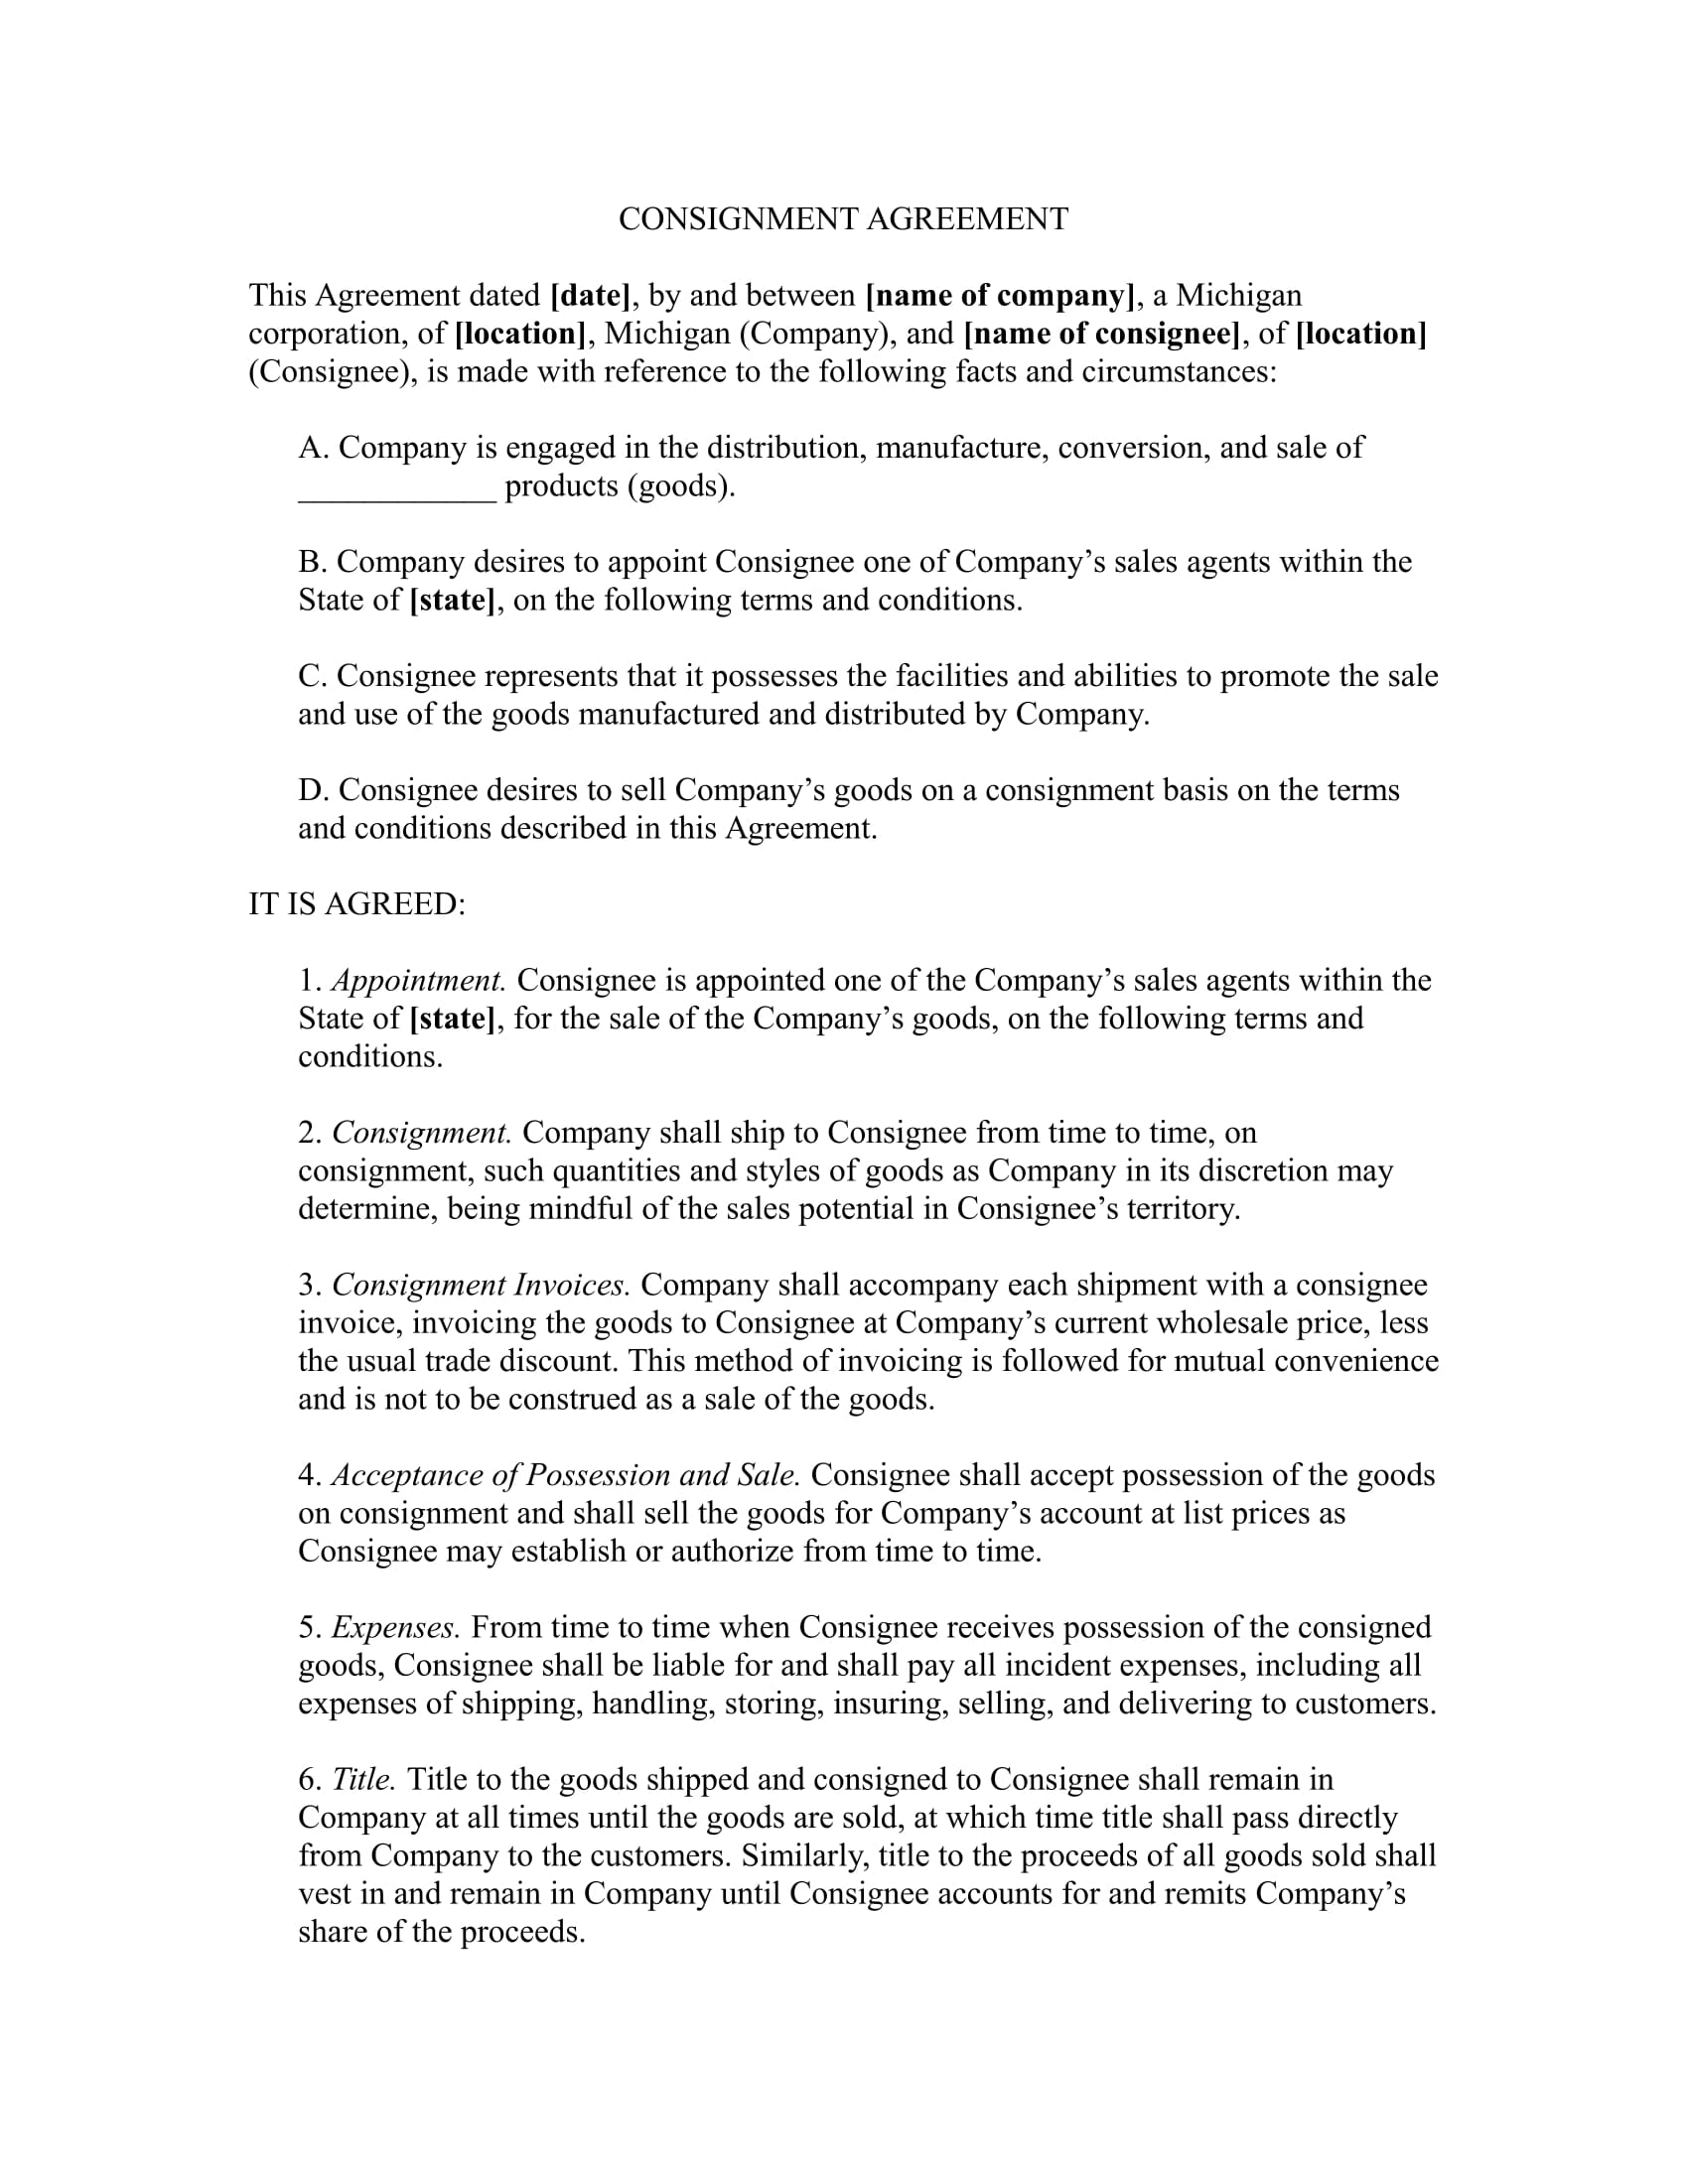 consignment agreement example